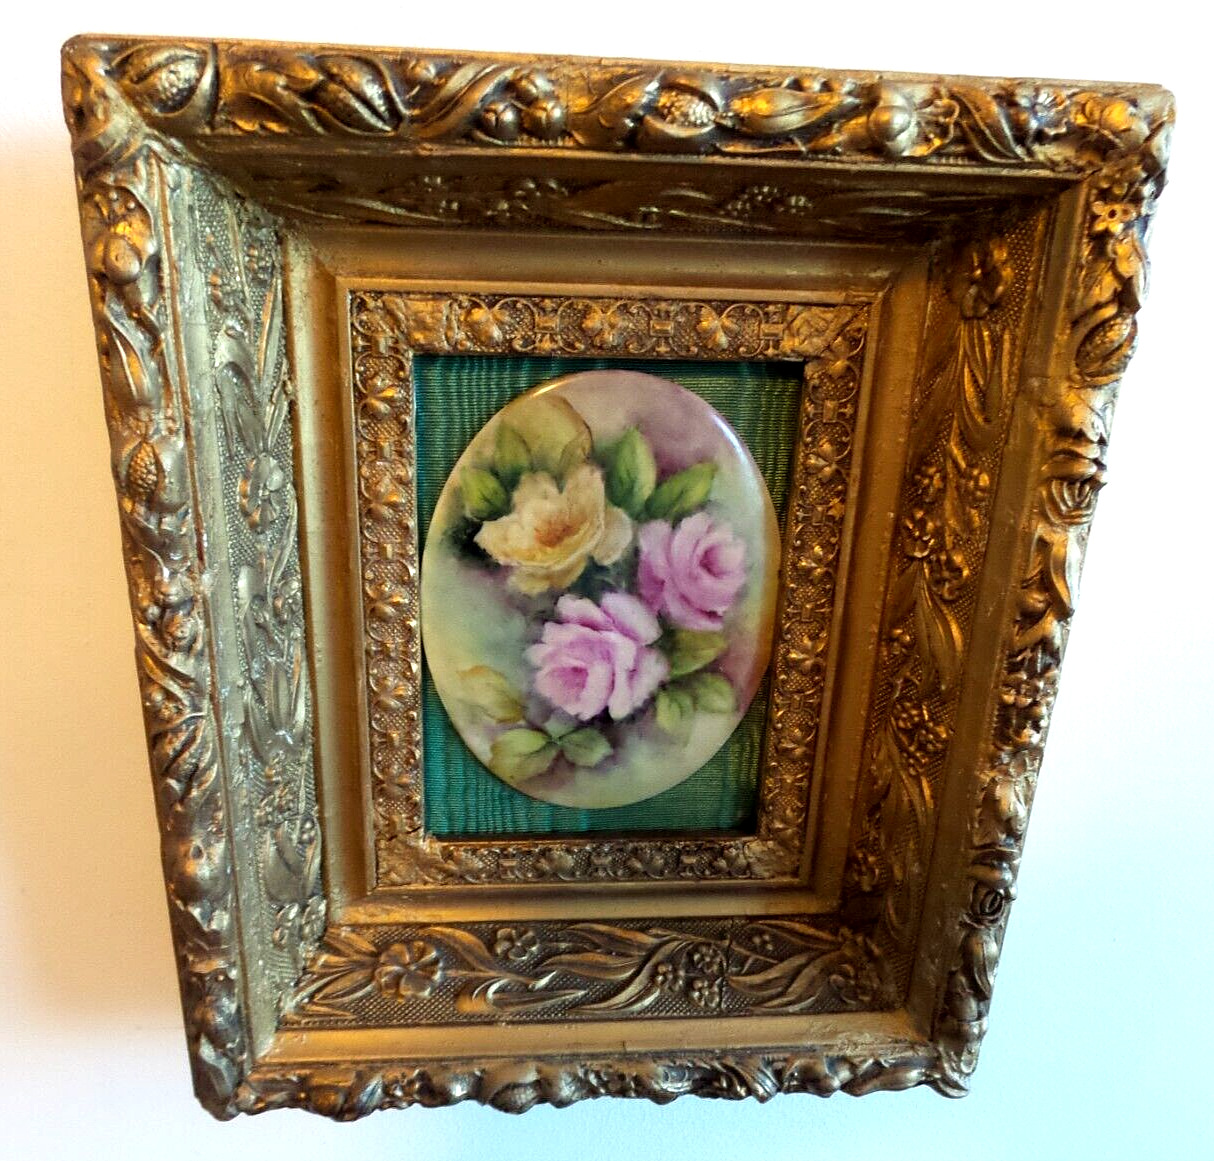 ANTIQUE WOOD GOLD GILT GESSO FRAME WITH HANDPAINTED TILE ROSES